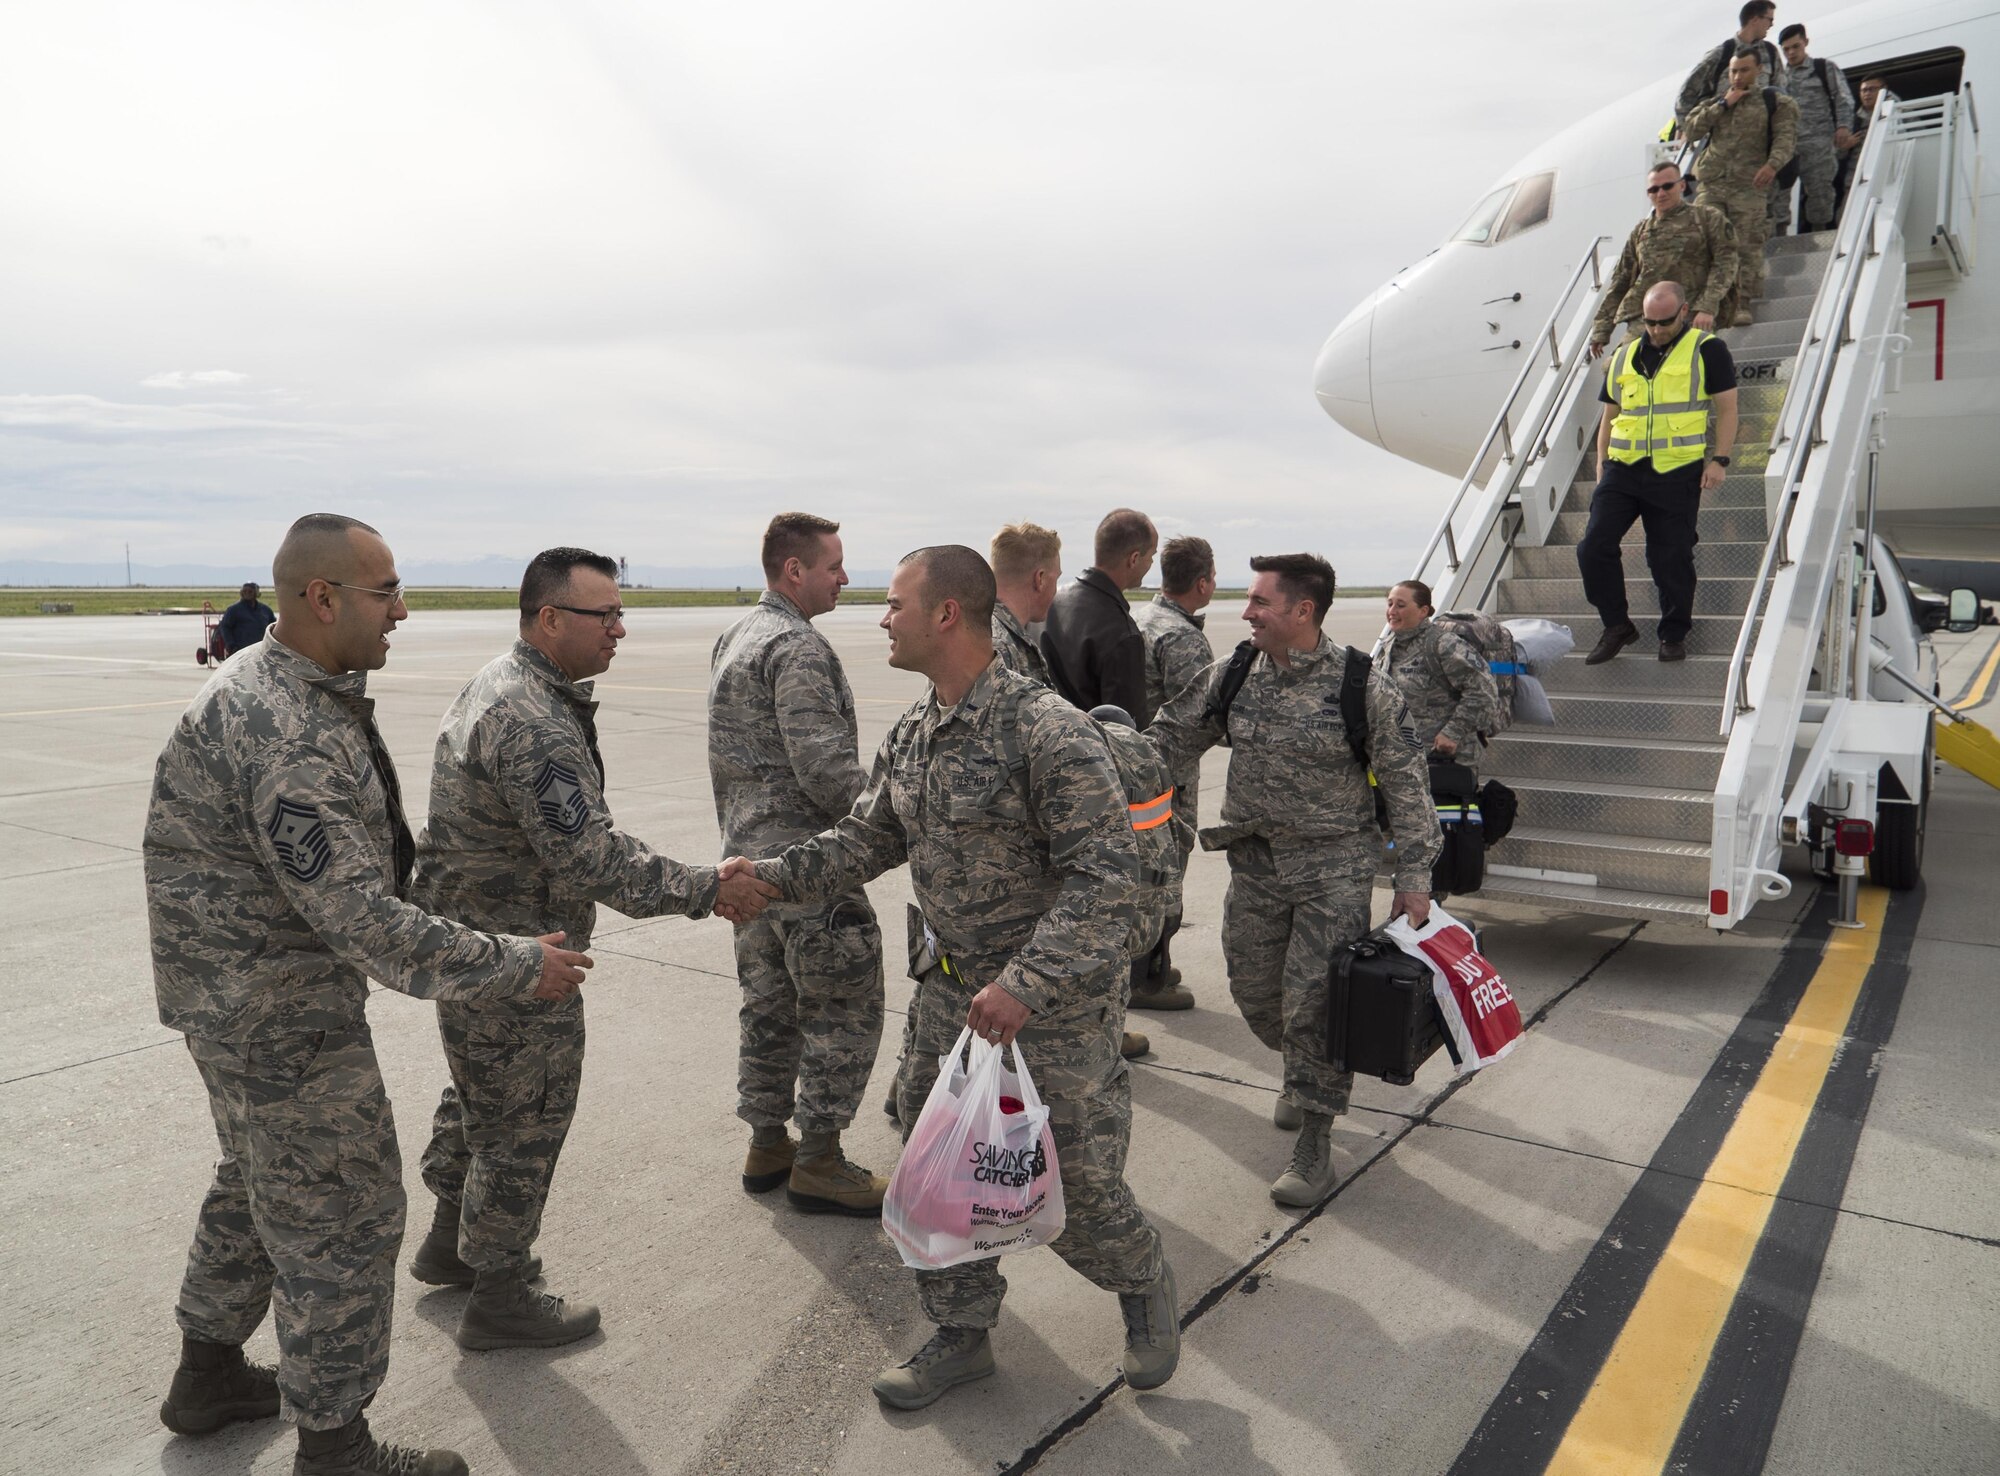 Base leadership welcome home deployers from the 726th Air Control Squadron at Mountain Home Air Force Base, Idaho, April 22, 2017. Despite the two flights being spaced 12 hours apart and challenging weather, the commanders and senior NCOs came out to give the deployers a proper homecoming. (U.S. Air Force photo/Staff Sgt. Samuel Morse)